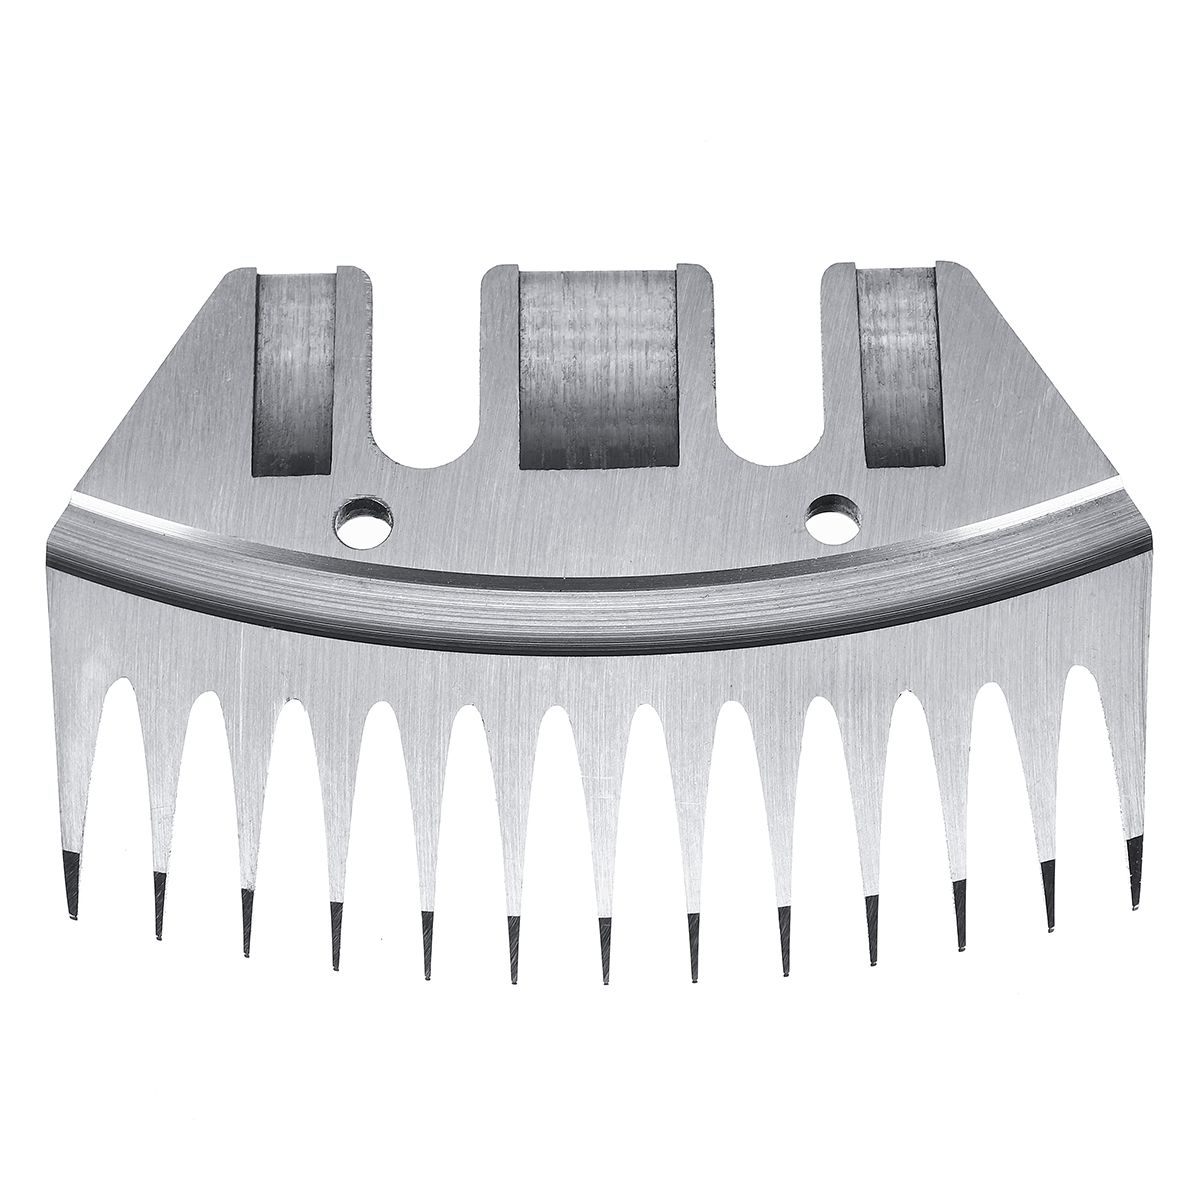 413-Tooth-Sheep-Goats-Hair-Clipper-Blades-Straight-Curved-Tooth-For-Electric-Shavers-Clippers-1379724